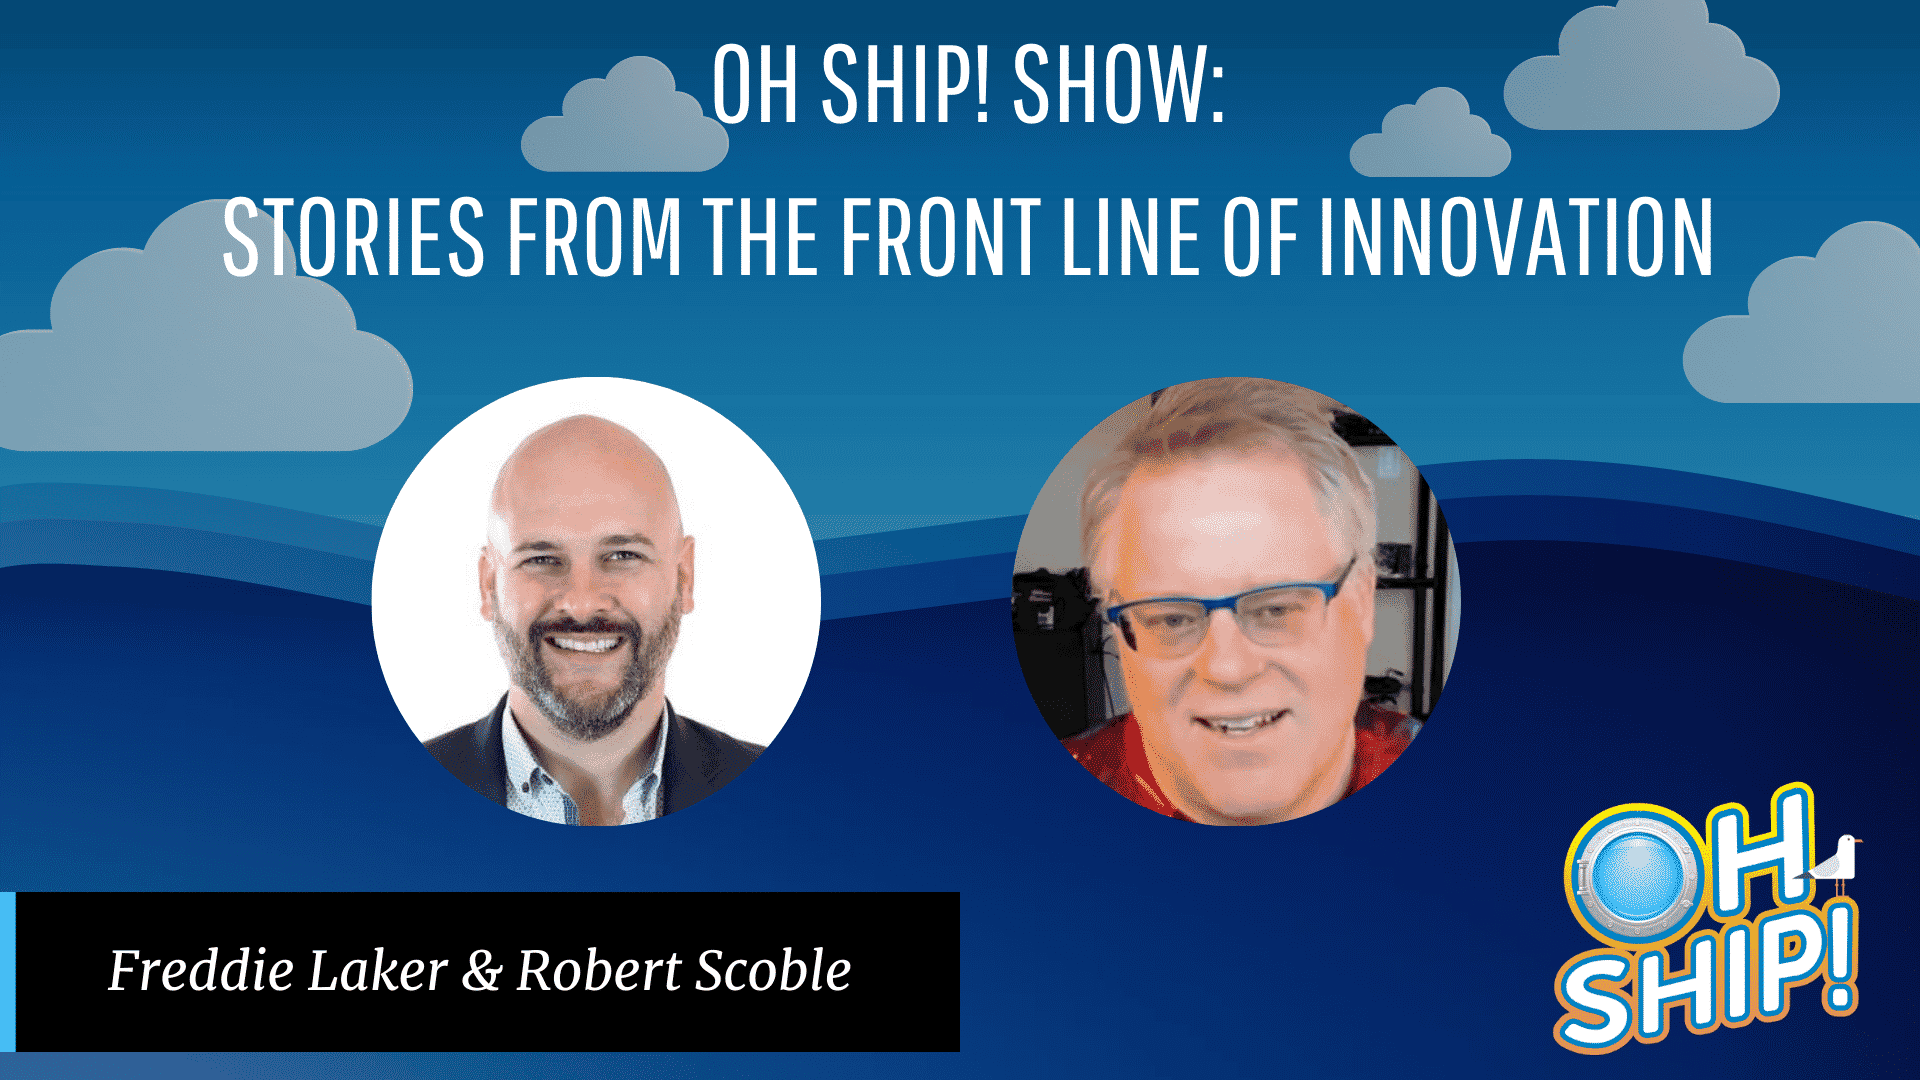 A promotional image for the "Oh Ship! Show: Stories from the Front Line of Innovation" featuring Freddie Laker and Robert Scoble. The background is navy with clouds, and the Oh Ship! logo appears in the bottom right corner.